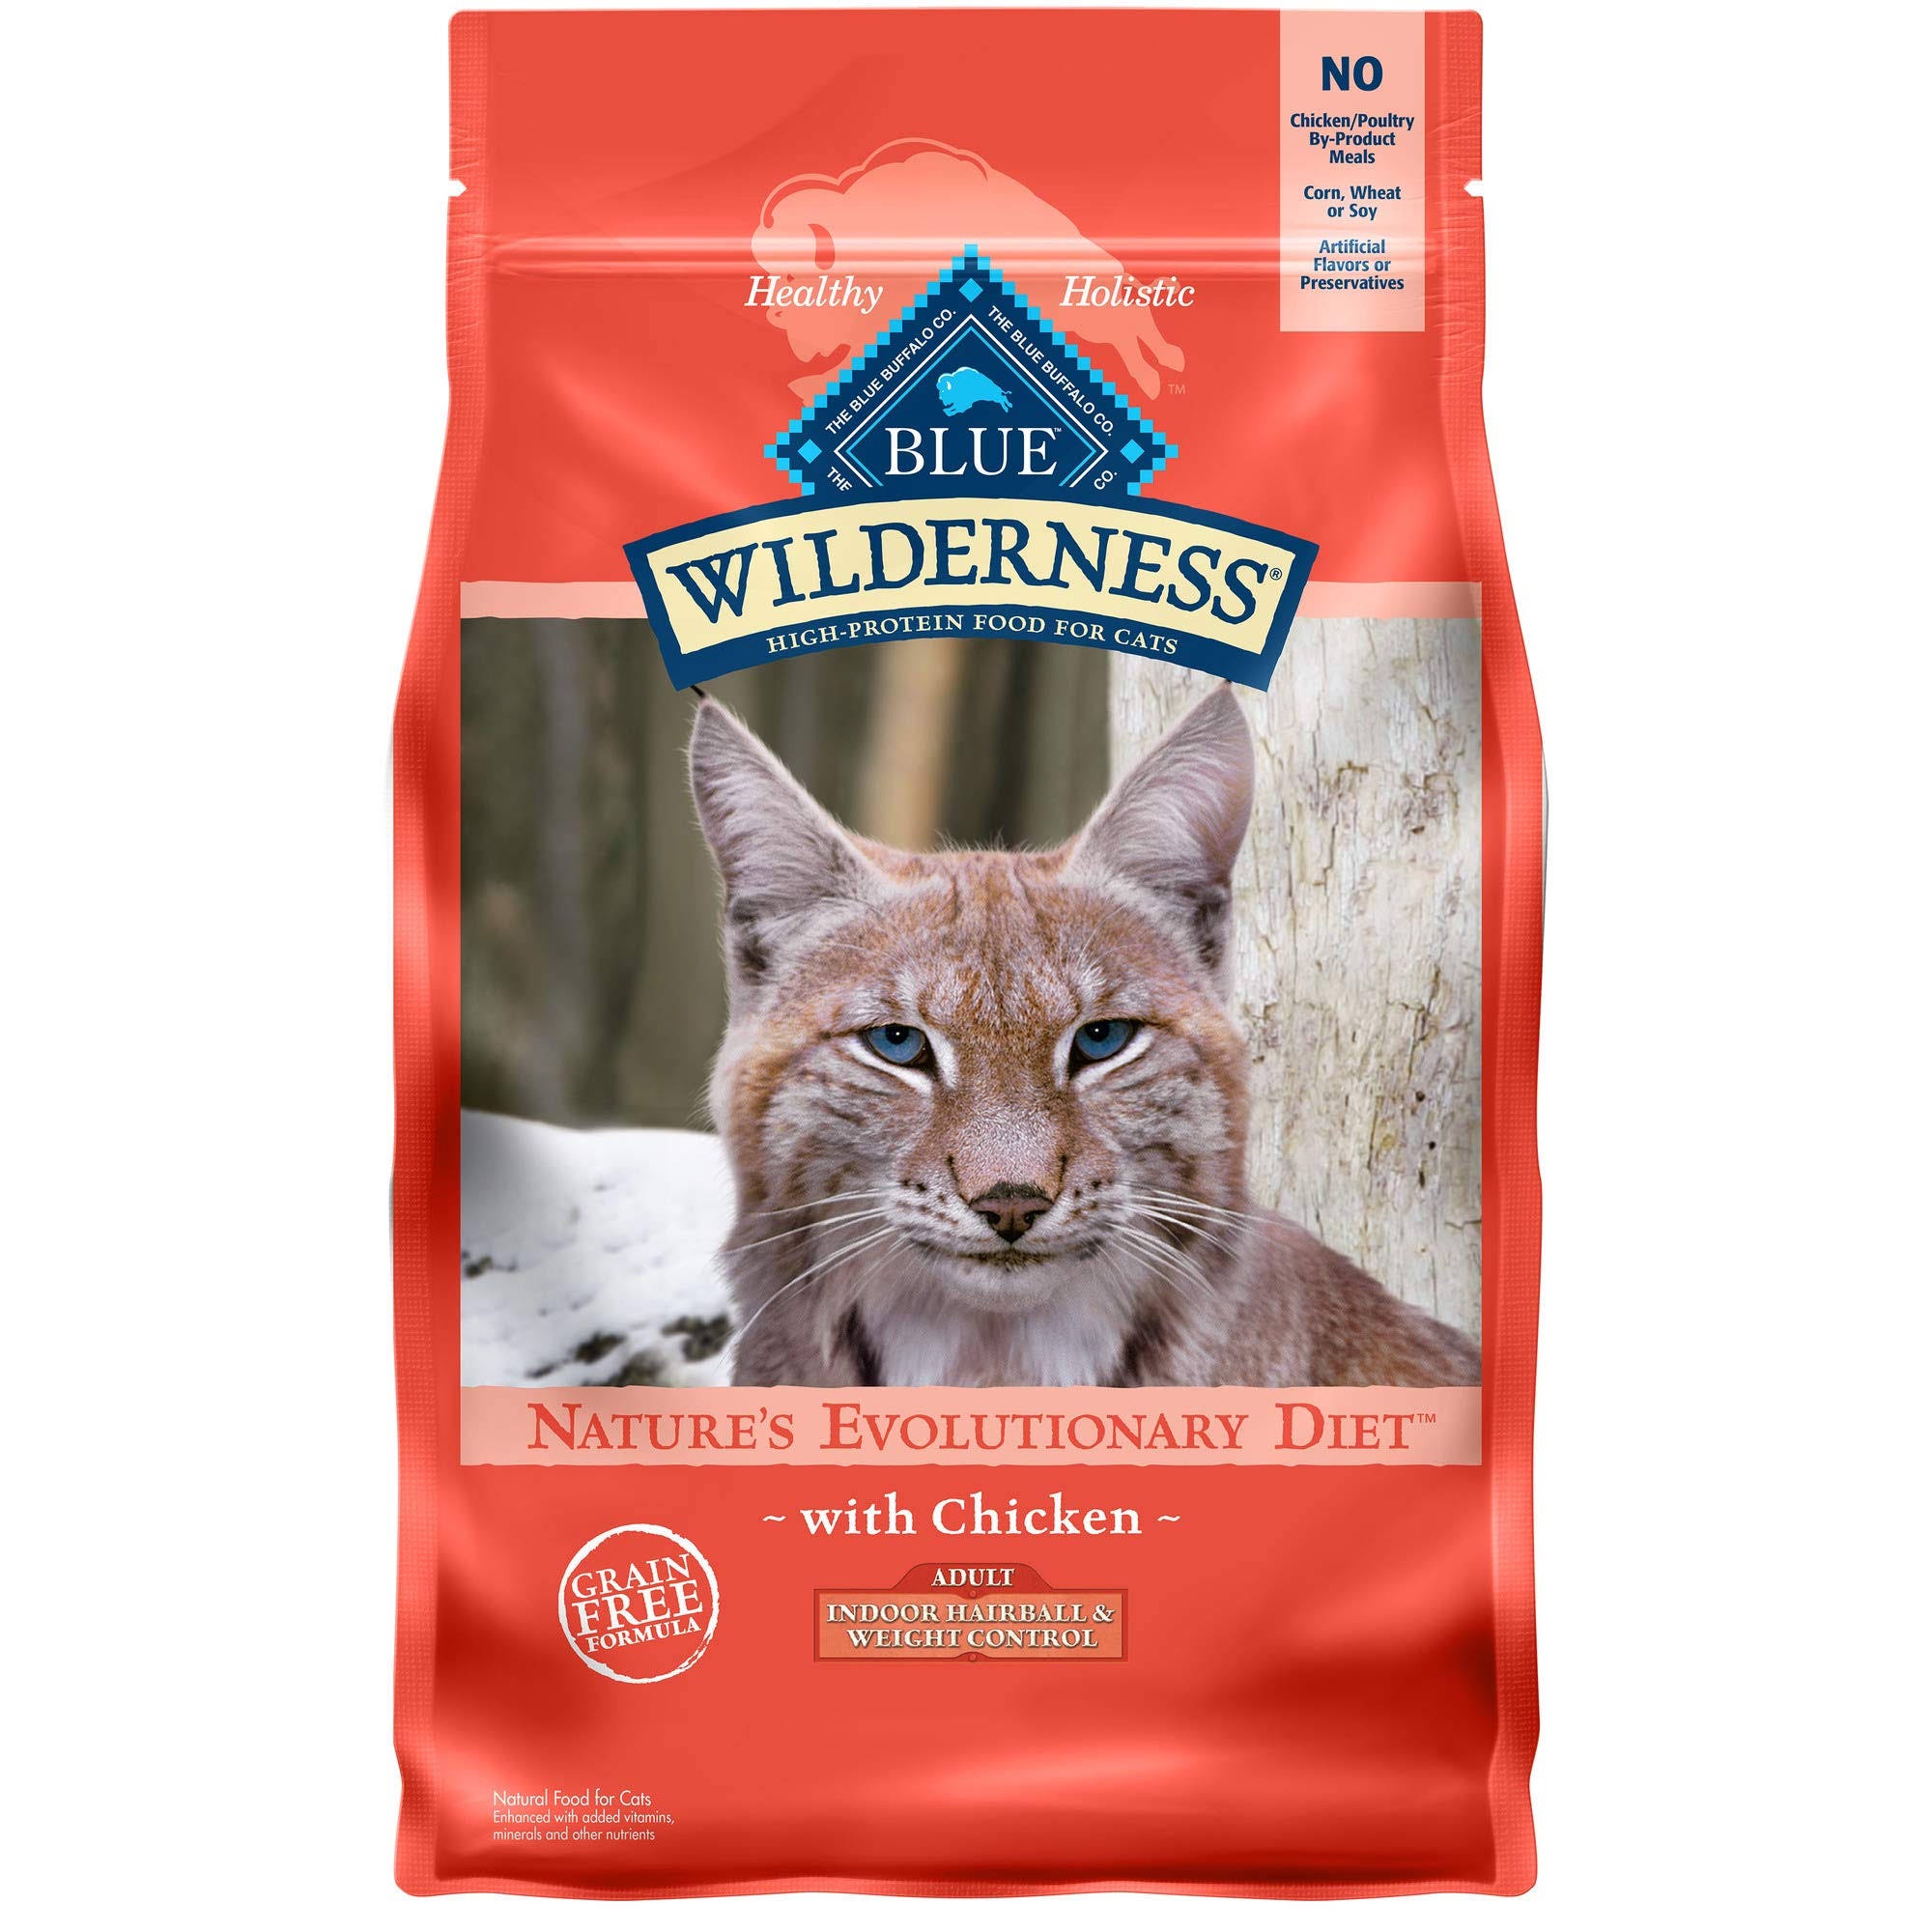 Blue Wilderness Indoor Hairball & Weight Control Cat Food | Image